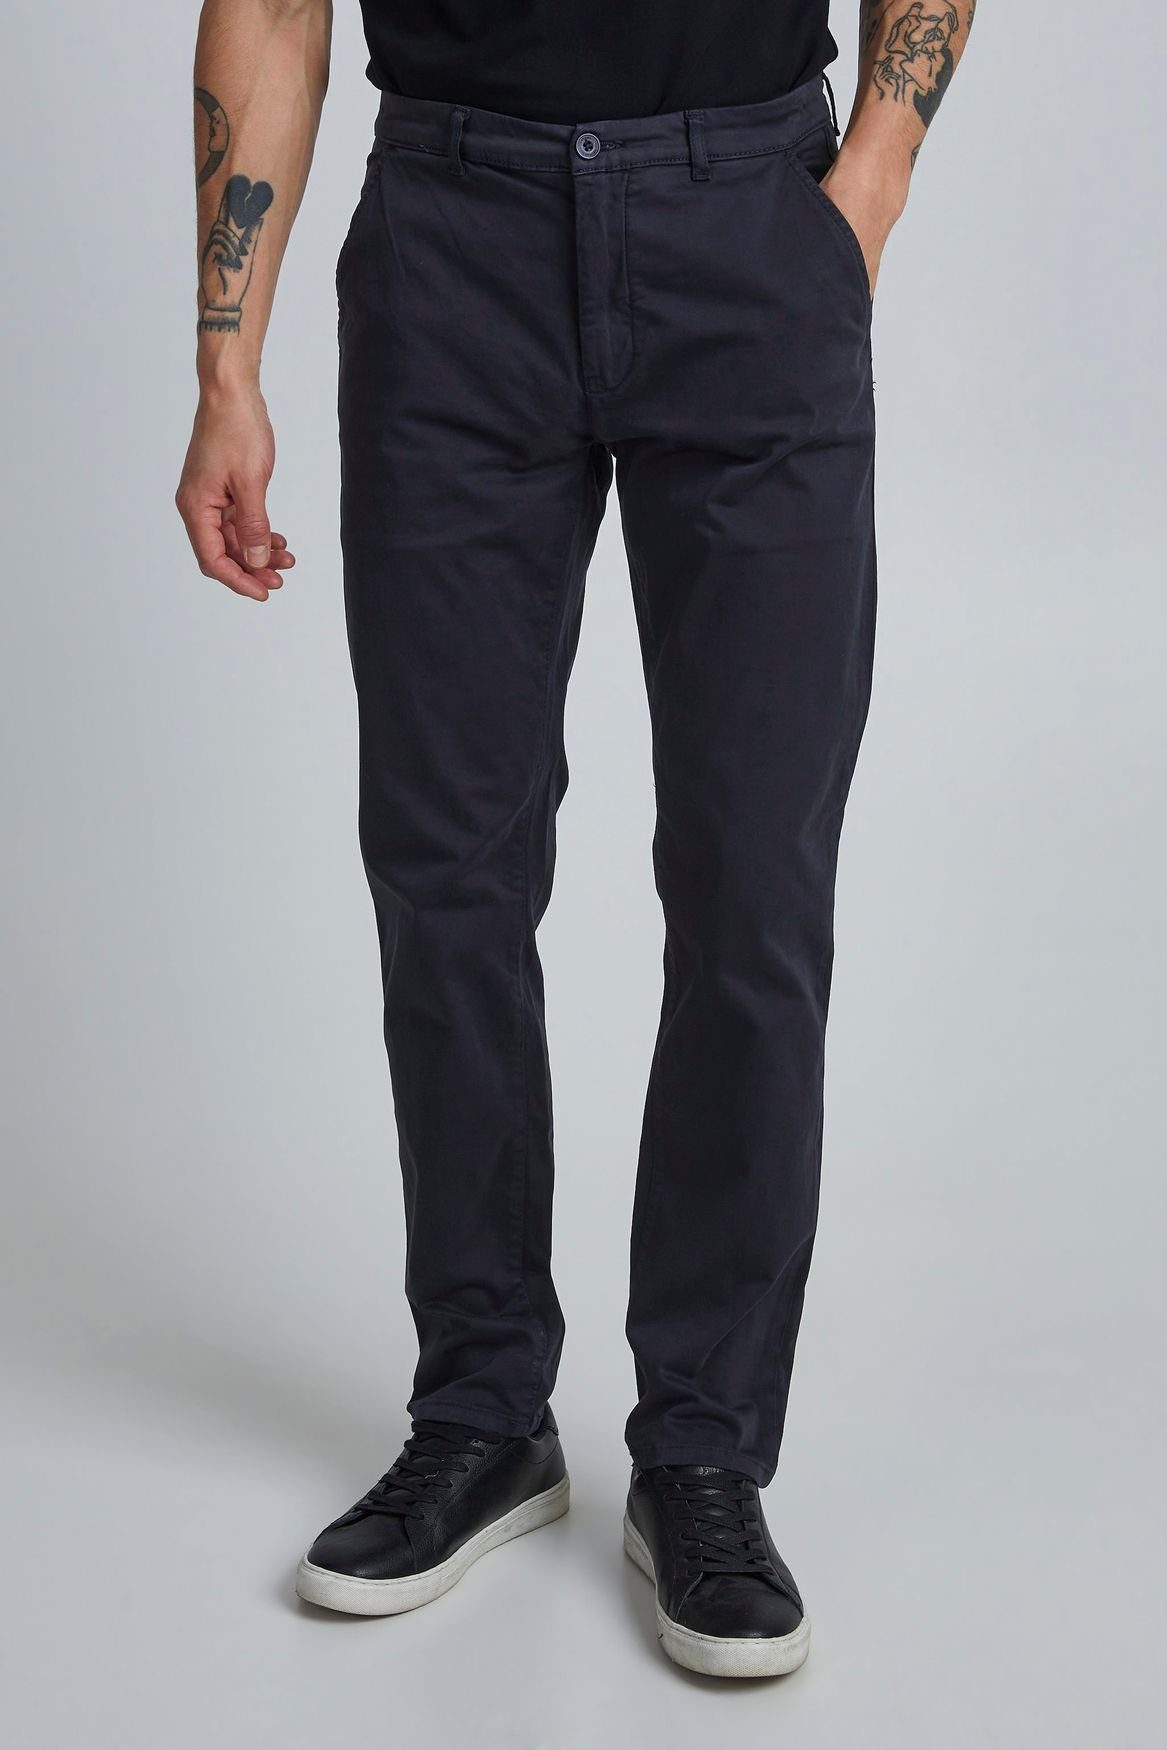 4239 Slim Casual in Hose Business Navy VIGGO Chino Chinohose Friday Fit Stoff Casual